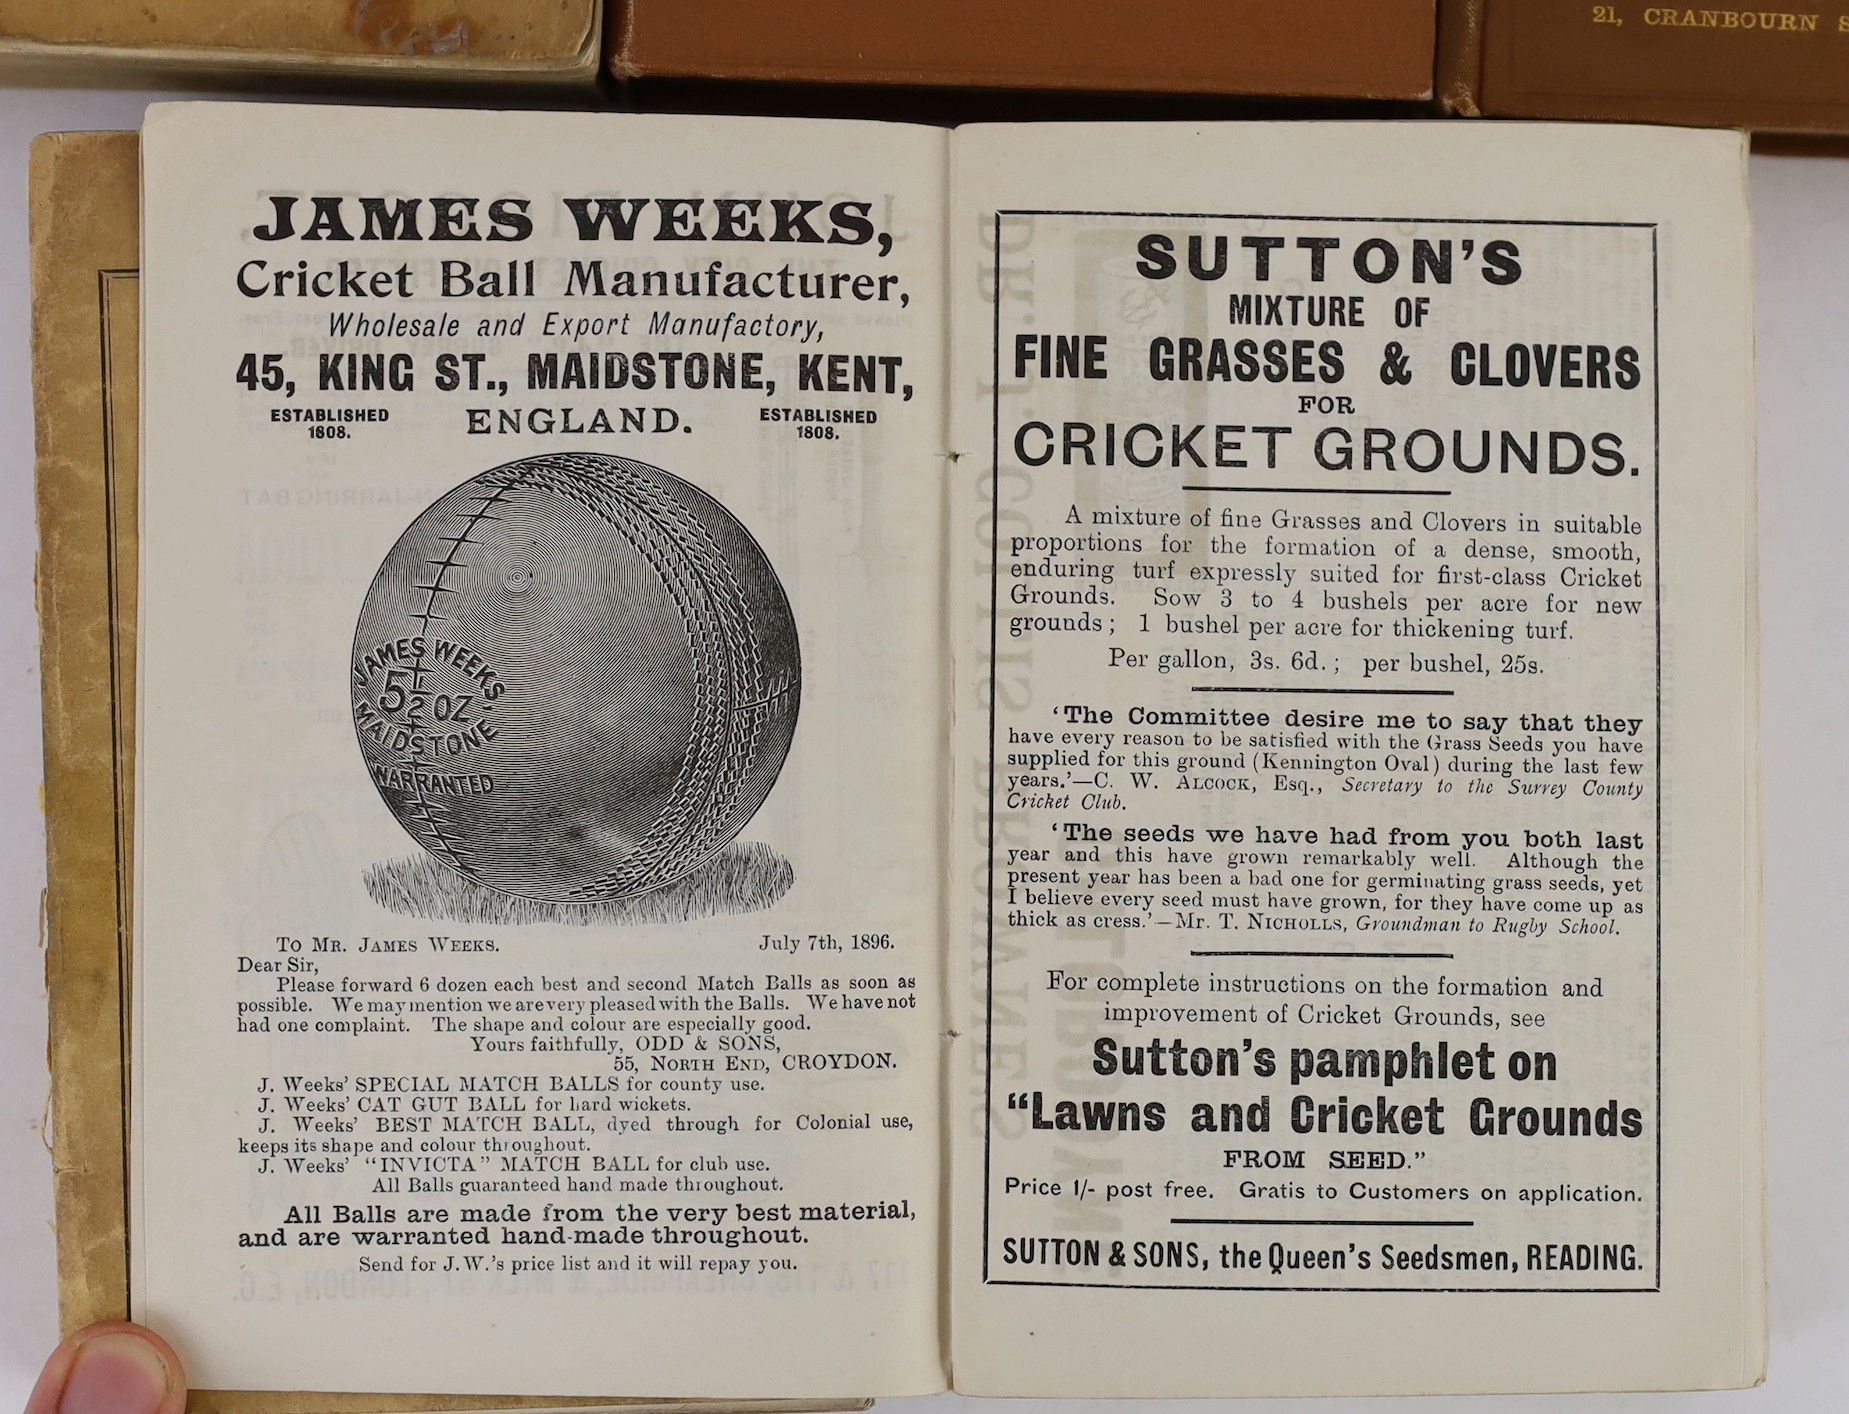 Wisden, John - Cricketers’ Almanack for years, 1895 (32nd edition) original paper wrappers, spine with some paper loss, gutters neatly strengthened with tape; 1896 (33rd edition) rebound brown cloth gilt, retaining origi